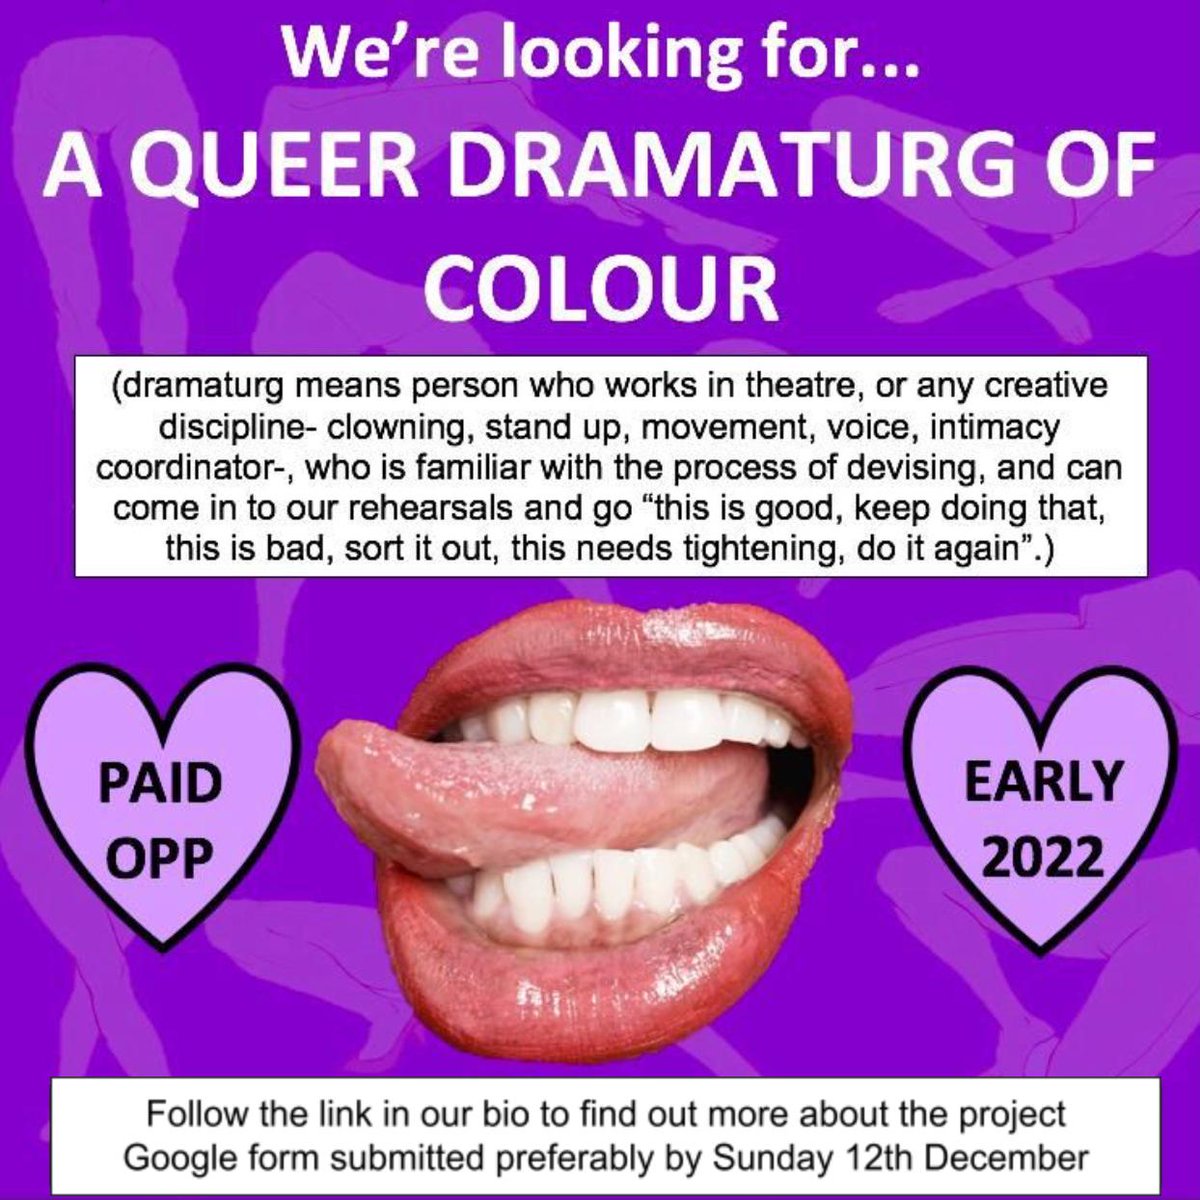 !! PAID JOB OPP !!

We're looking for a queer dramaturg of colour to work with us on our show in development. Please find job description and application form in the link in our bio xx pls share  💚💚

#artsopportunity #artsjobs